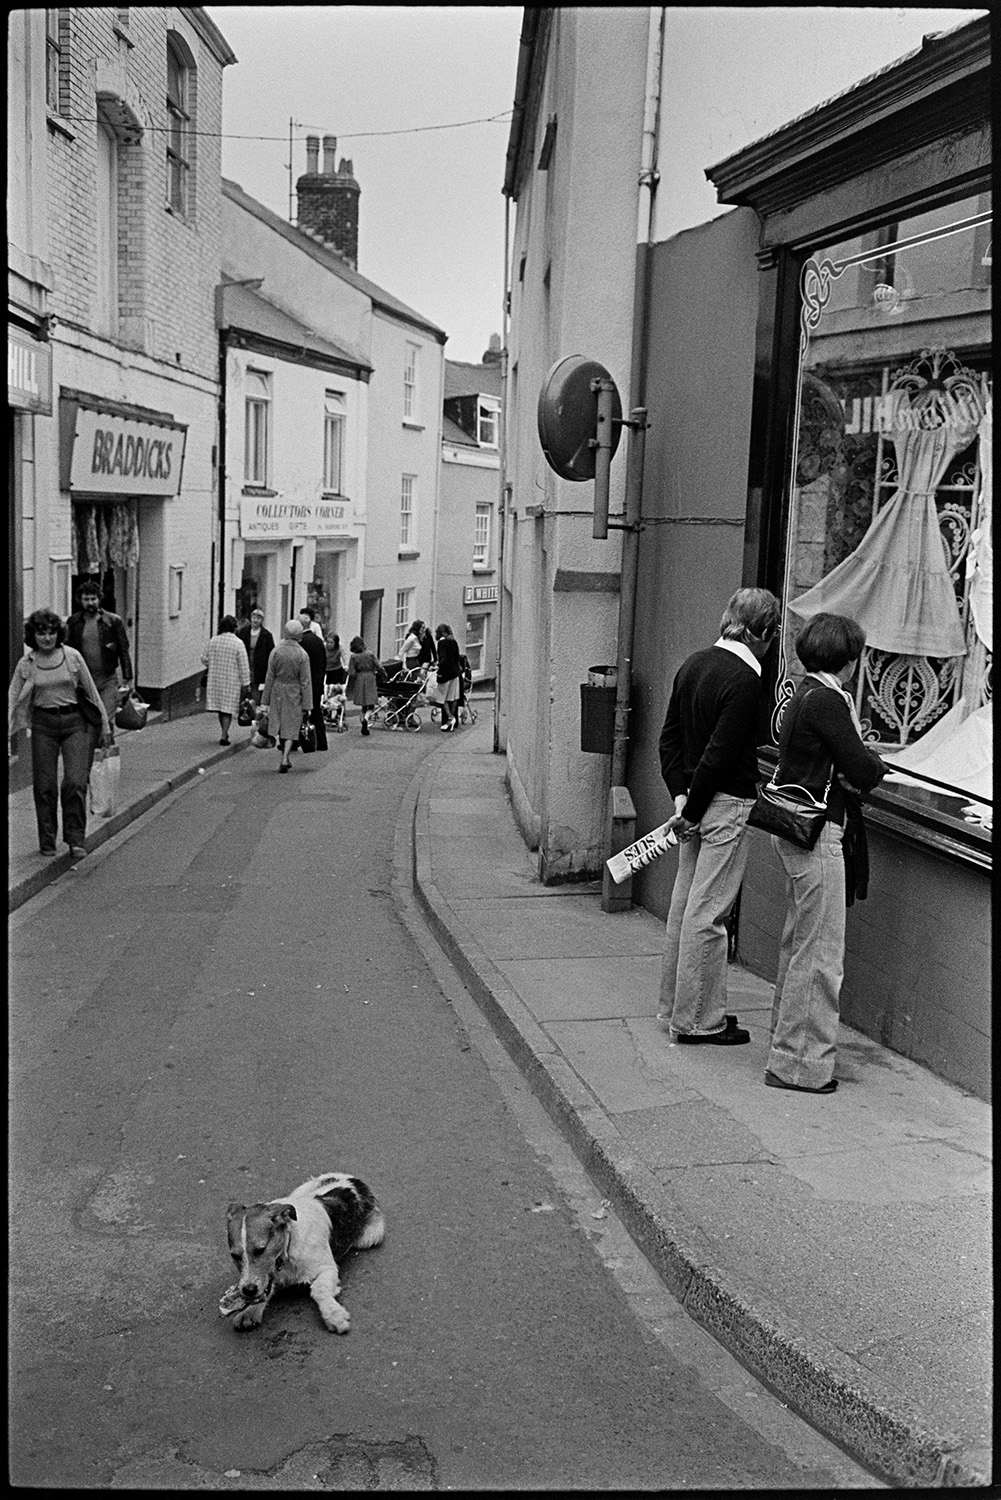 Street scenes with shop burnt out, dog eating bone !! 
[Shoppers in Bideford High Street looking in shop windows. Shop fronts, including Braddicks can be seen. In the foreground a dog is eating a bone in the middle of the street.]